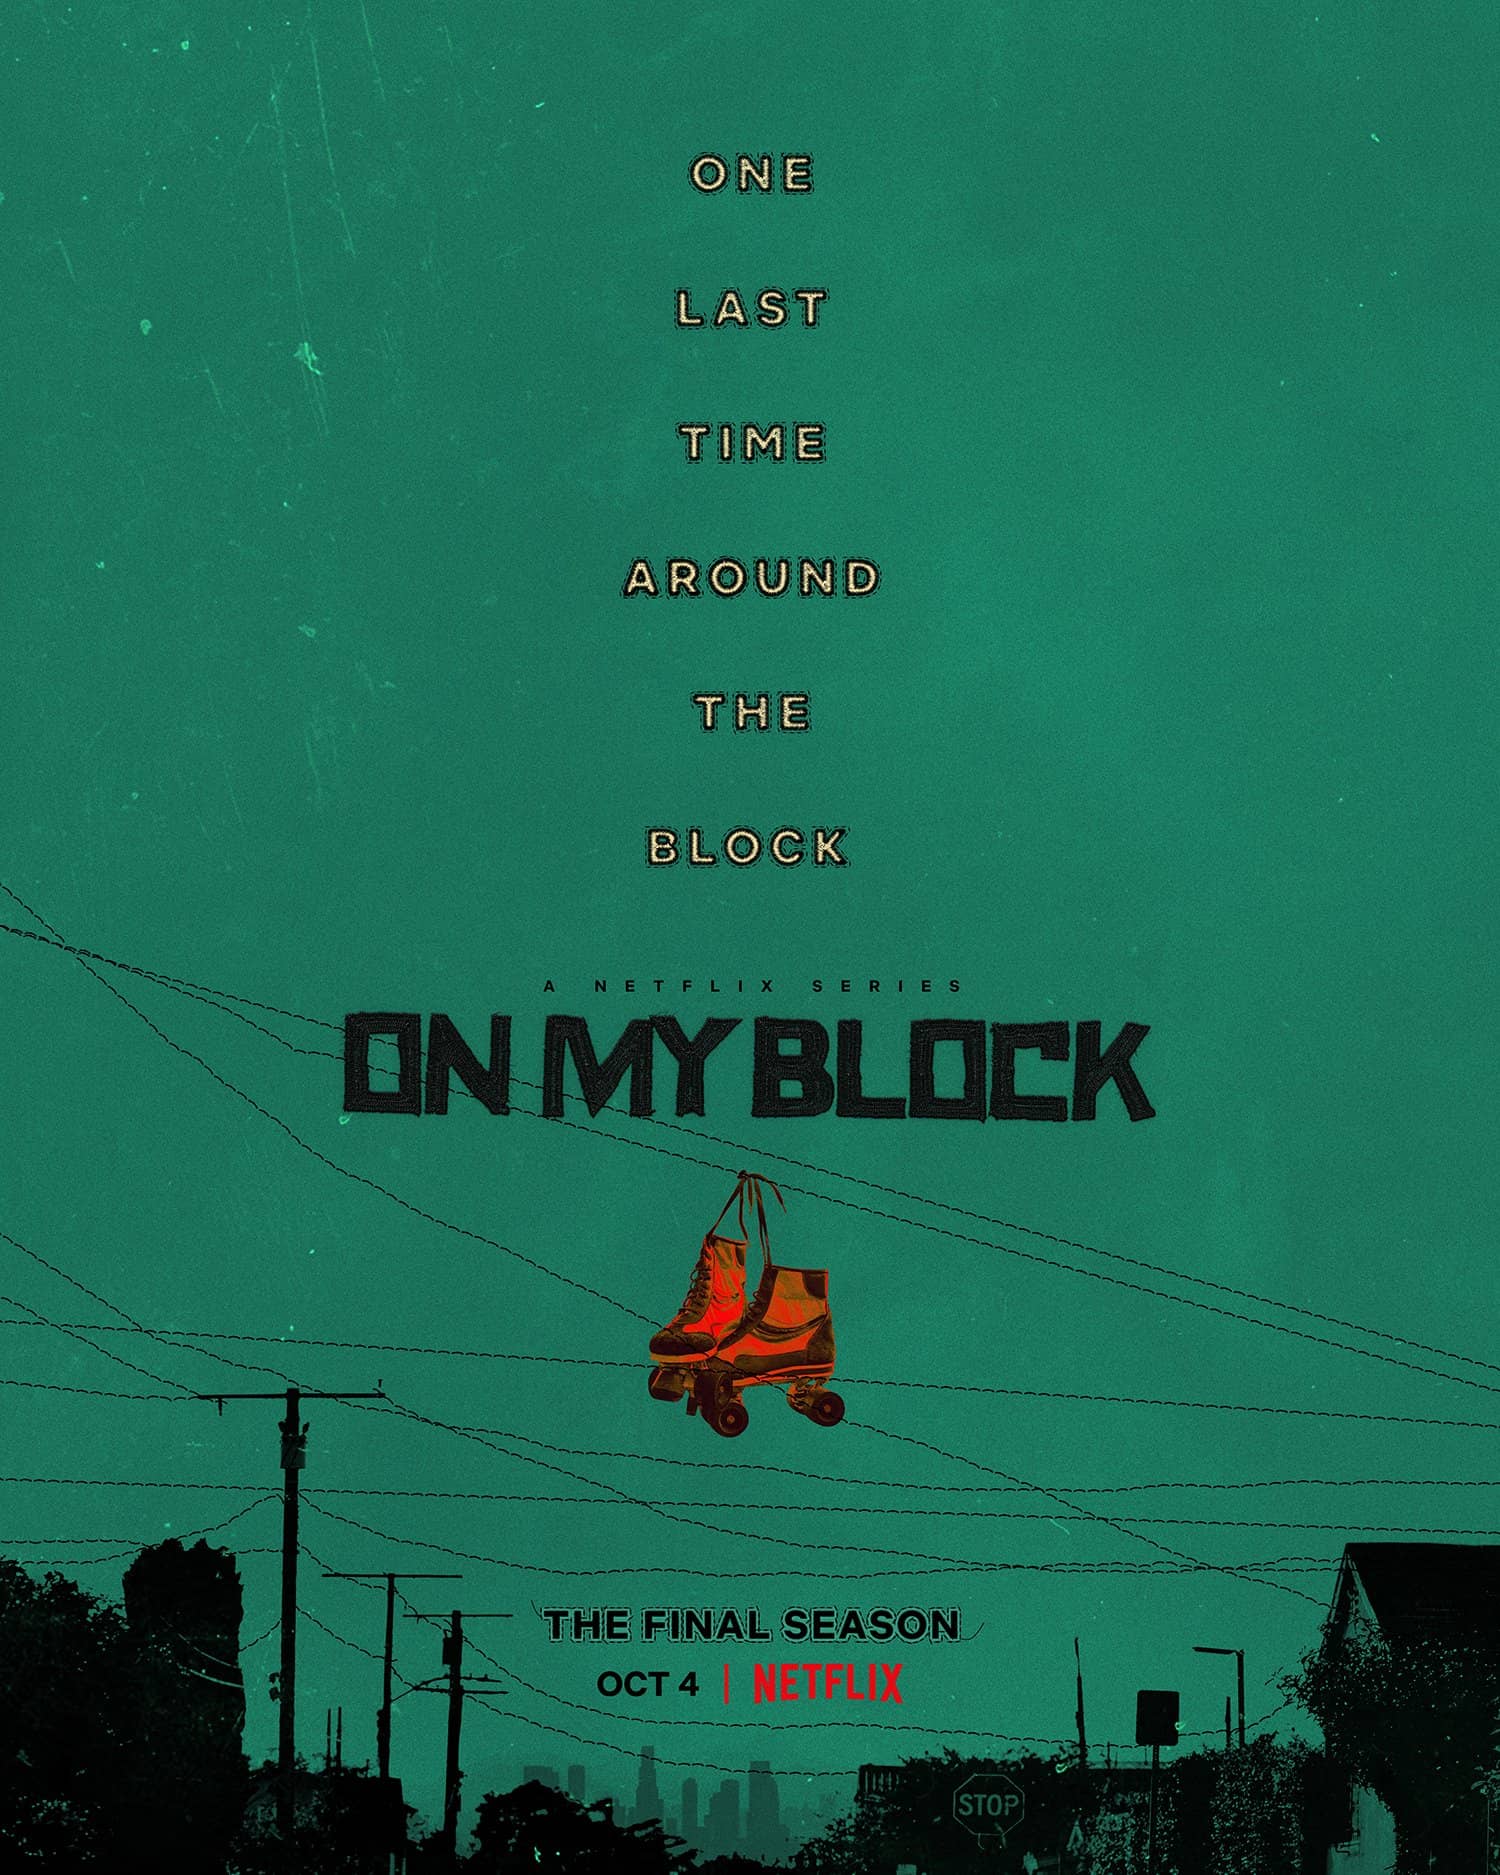 on my block posters